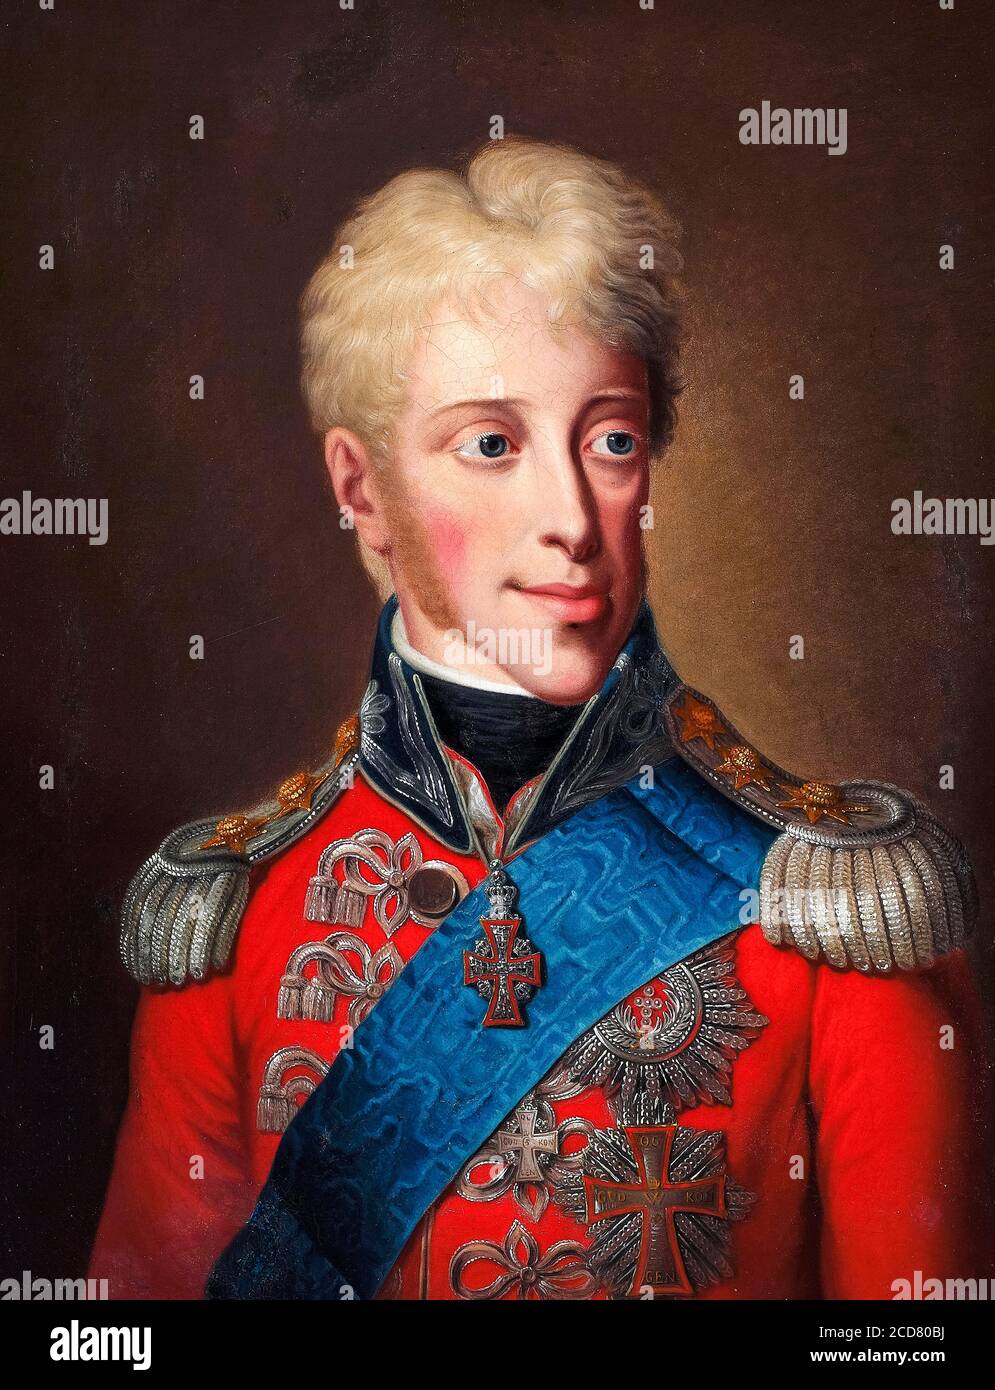 Frederick VI (1768-1839), King of Denmark and Norway, portrait painting by Christoph Wilhelm Sohlien, after Friedrich Carl Groger, 1855 Stock Photo